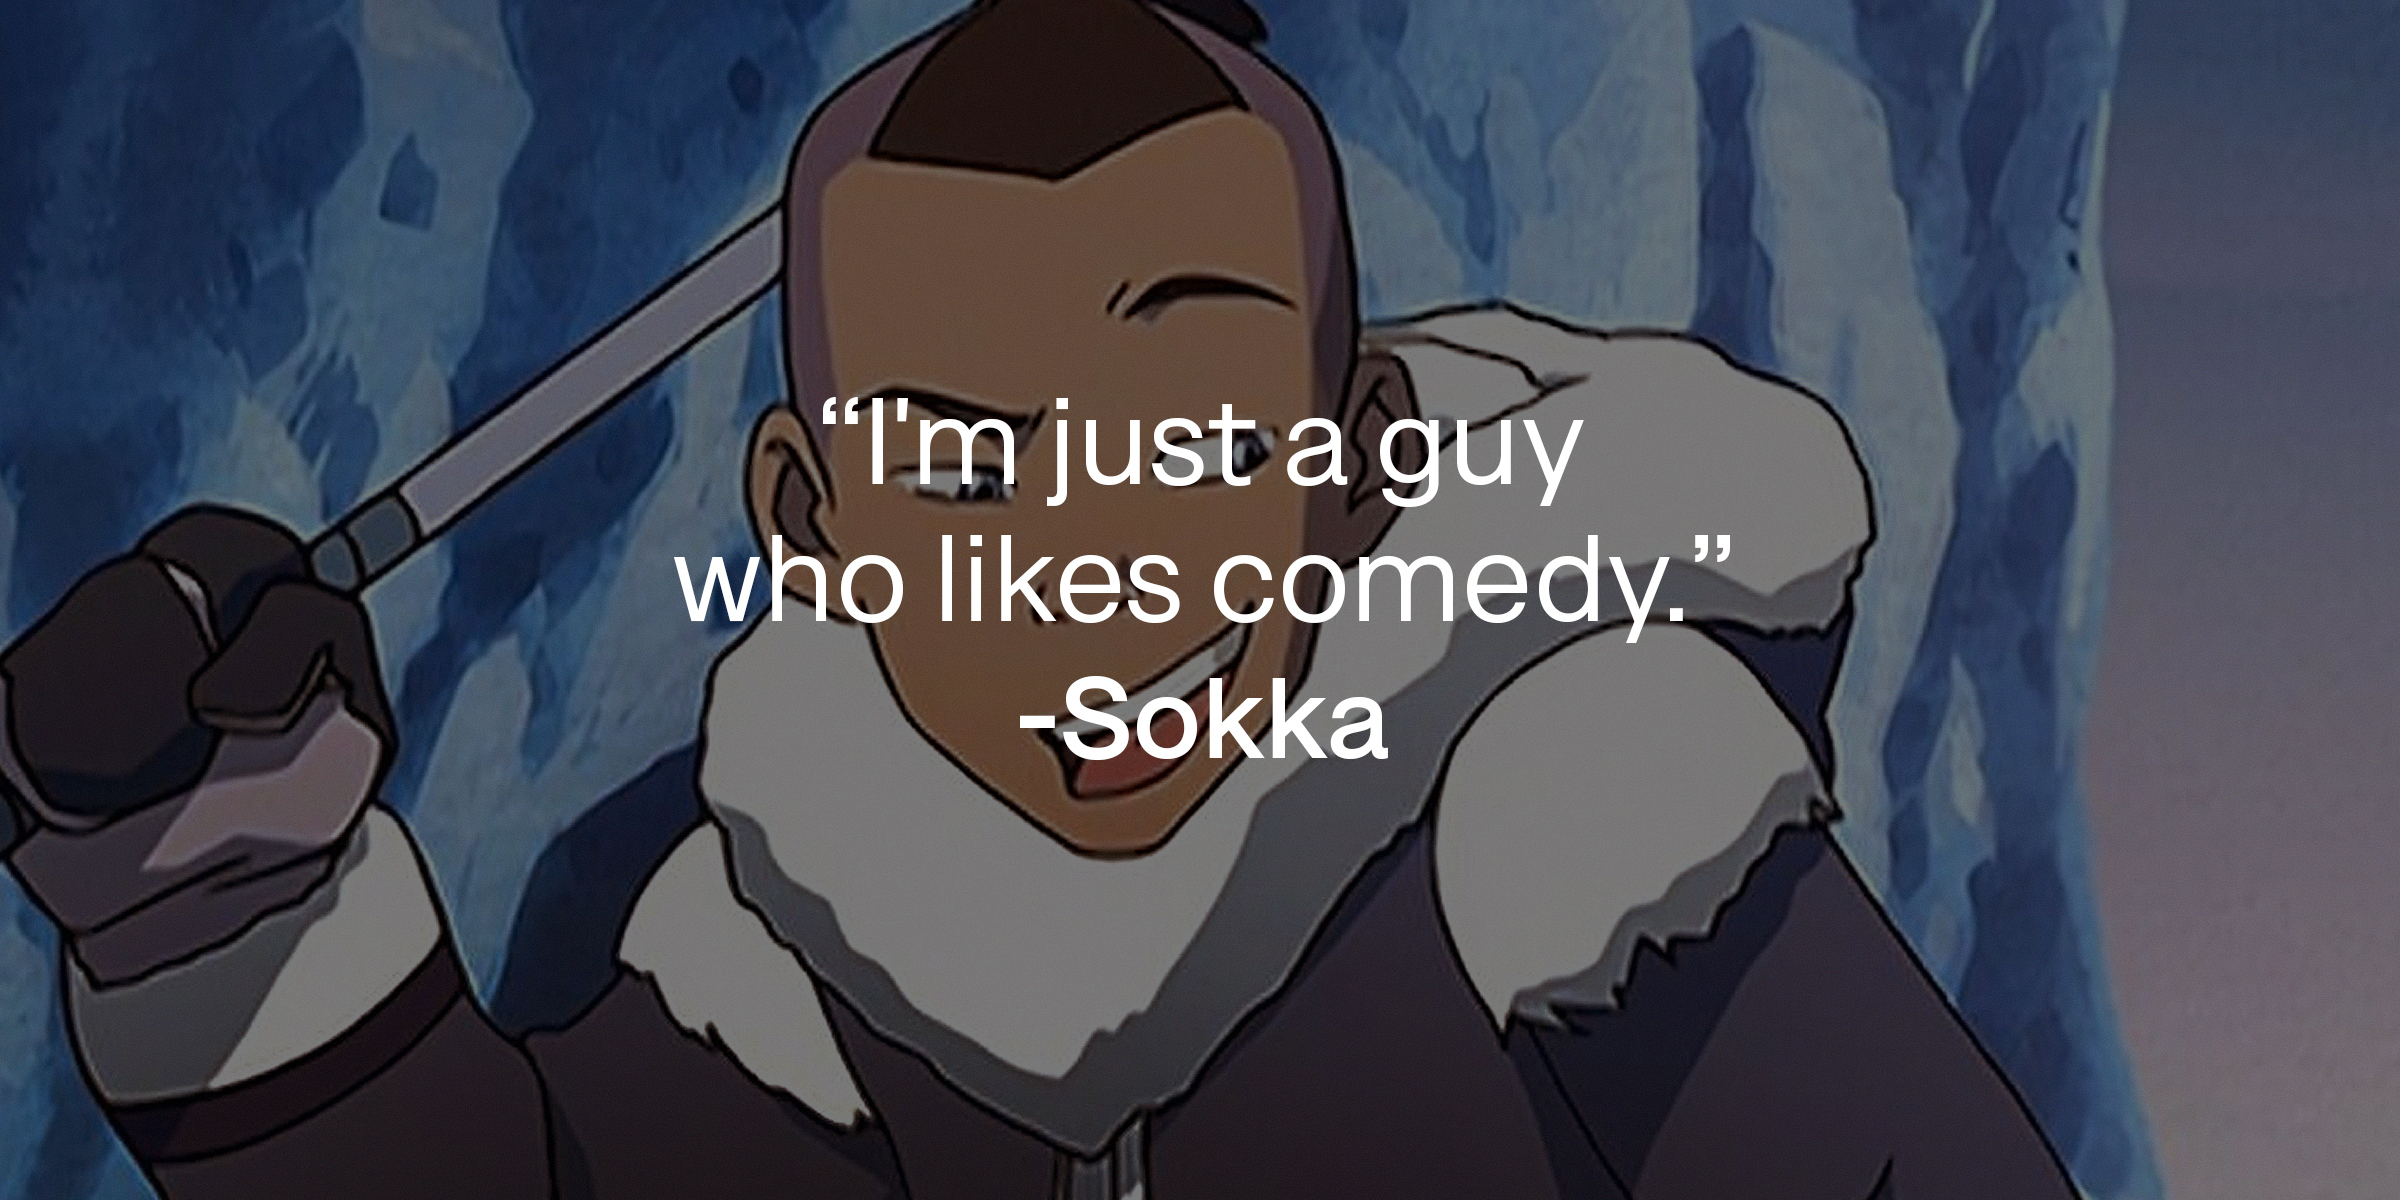 An image of Sokka with his quote: "I'm just a guy who likes comedy." | Source: facebook.com/avatarthelastairbender